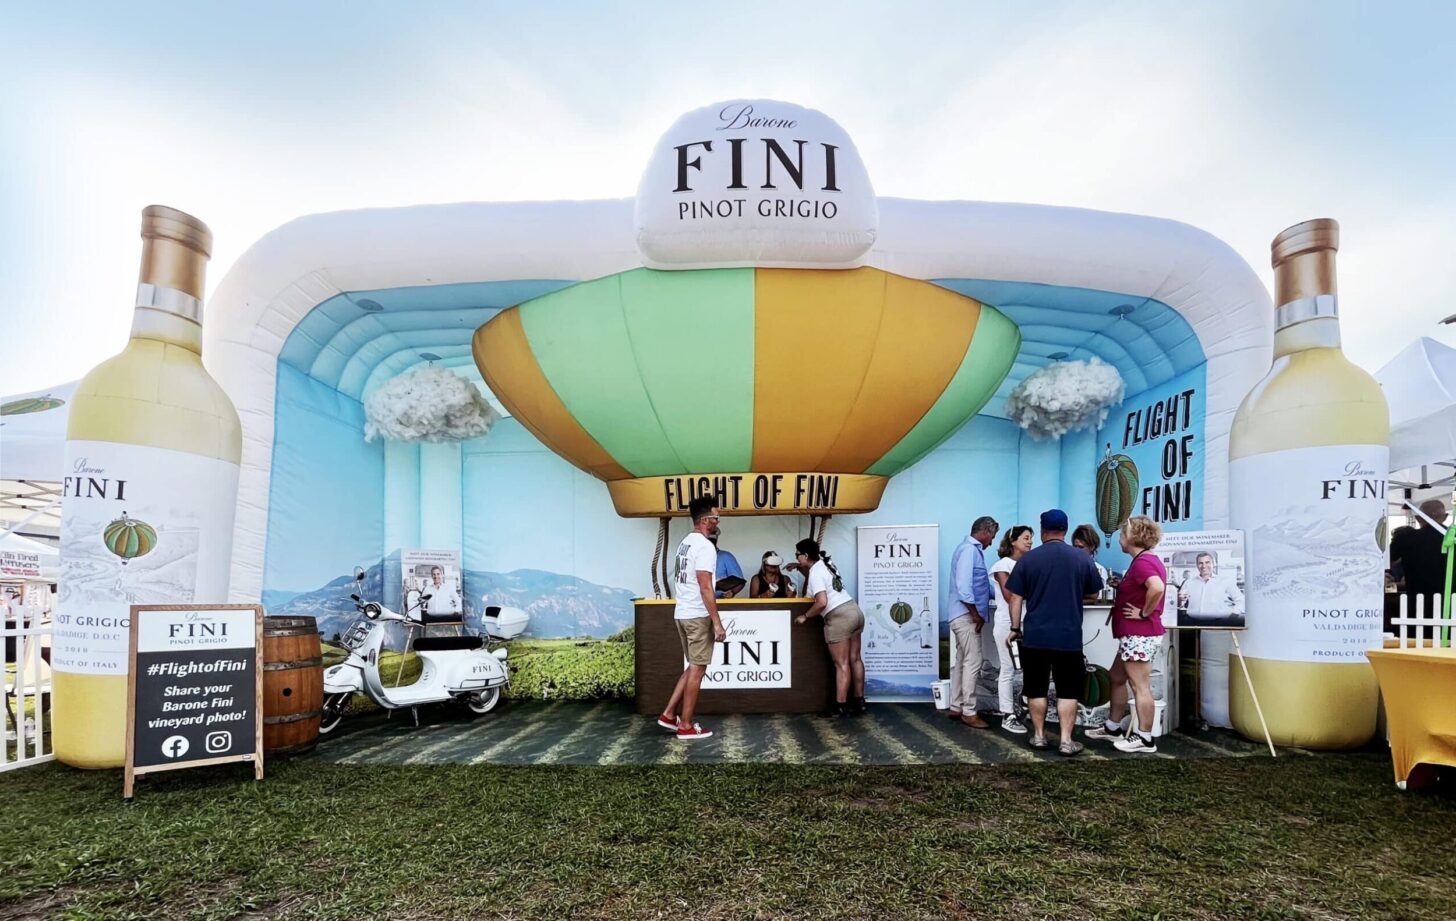 Barone Fini brand activation experiential marketing Virtual reality